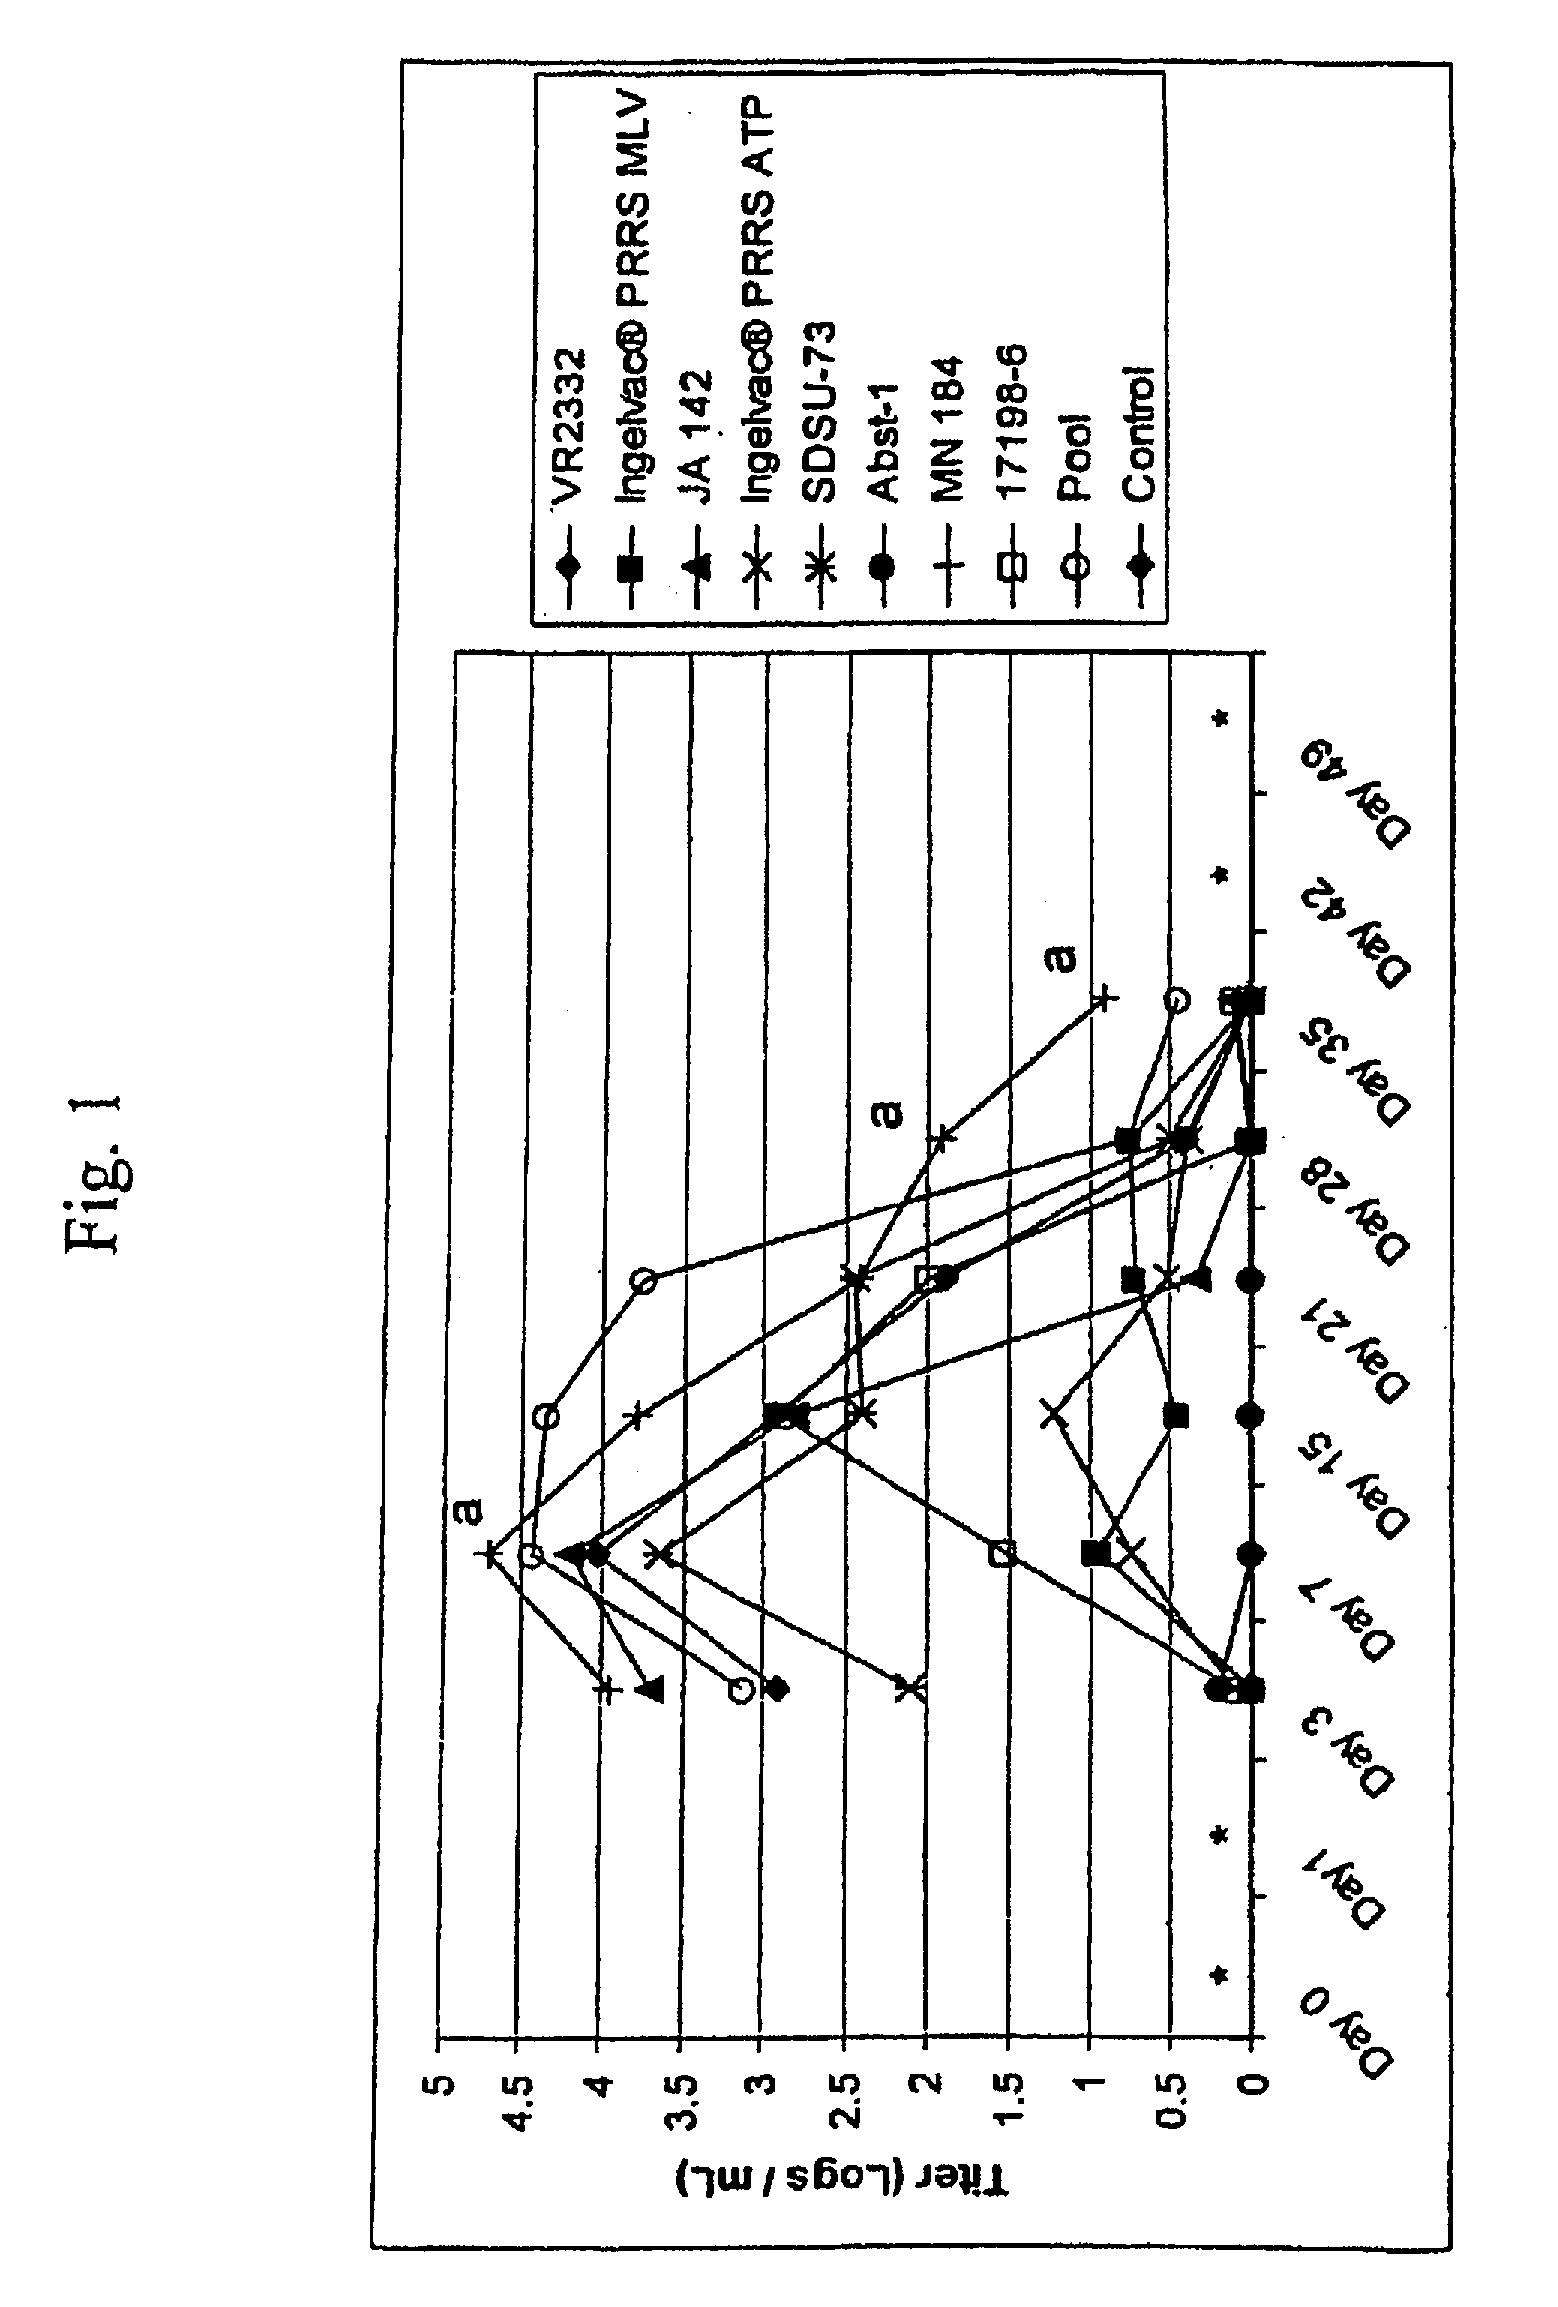 Porcine reproductive and respiratory syndrome isolates and methods of use